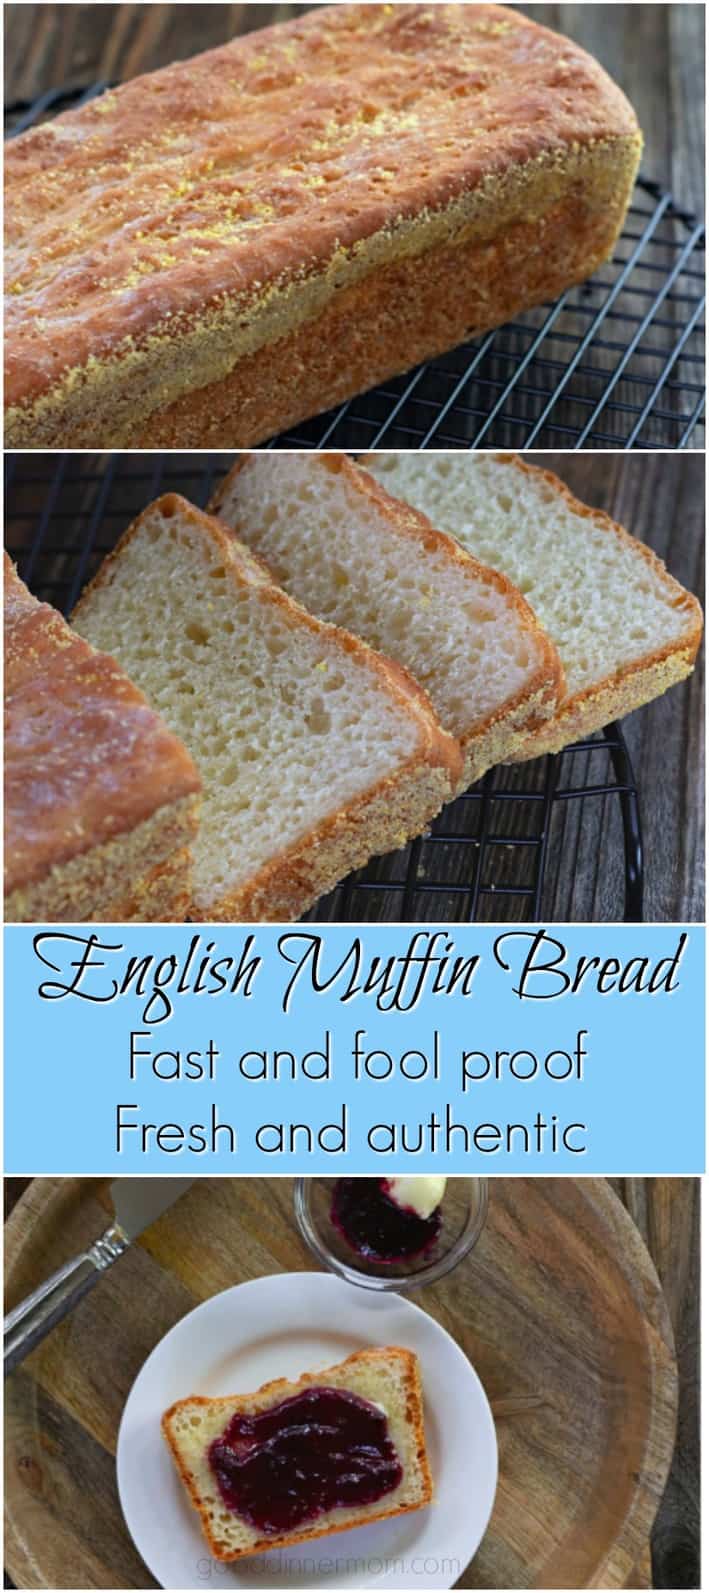 English Muffin Bread is ready in no time, tastes just like a fresh English muffin. Perfect for toasting, Benedicts, or sandwiches. #muffins #Englishmuffin #toast #eggsbenedict #sandwiches #breakfast #lunch #30minutesorless